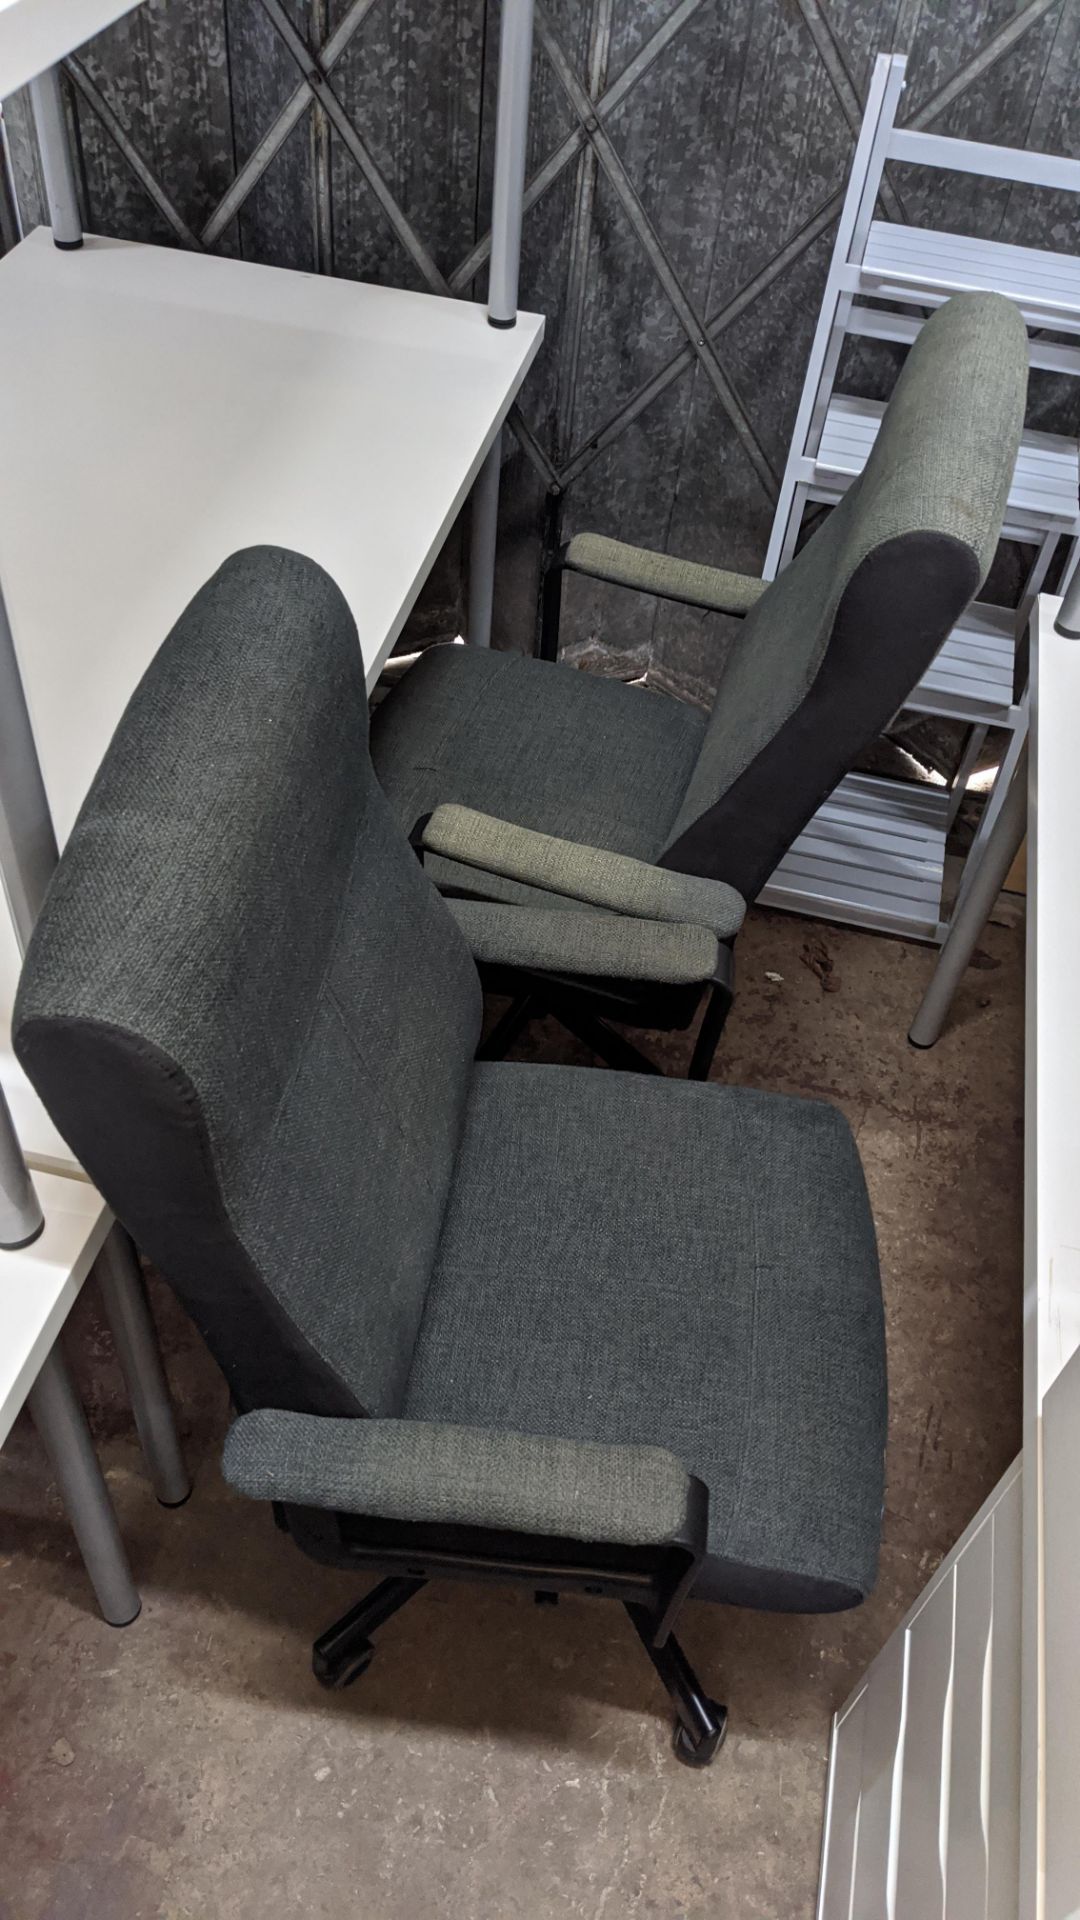 3 off matching upholstered high back executive chairs. This is one of a number of lots forming the - Image 6 of 6